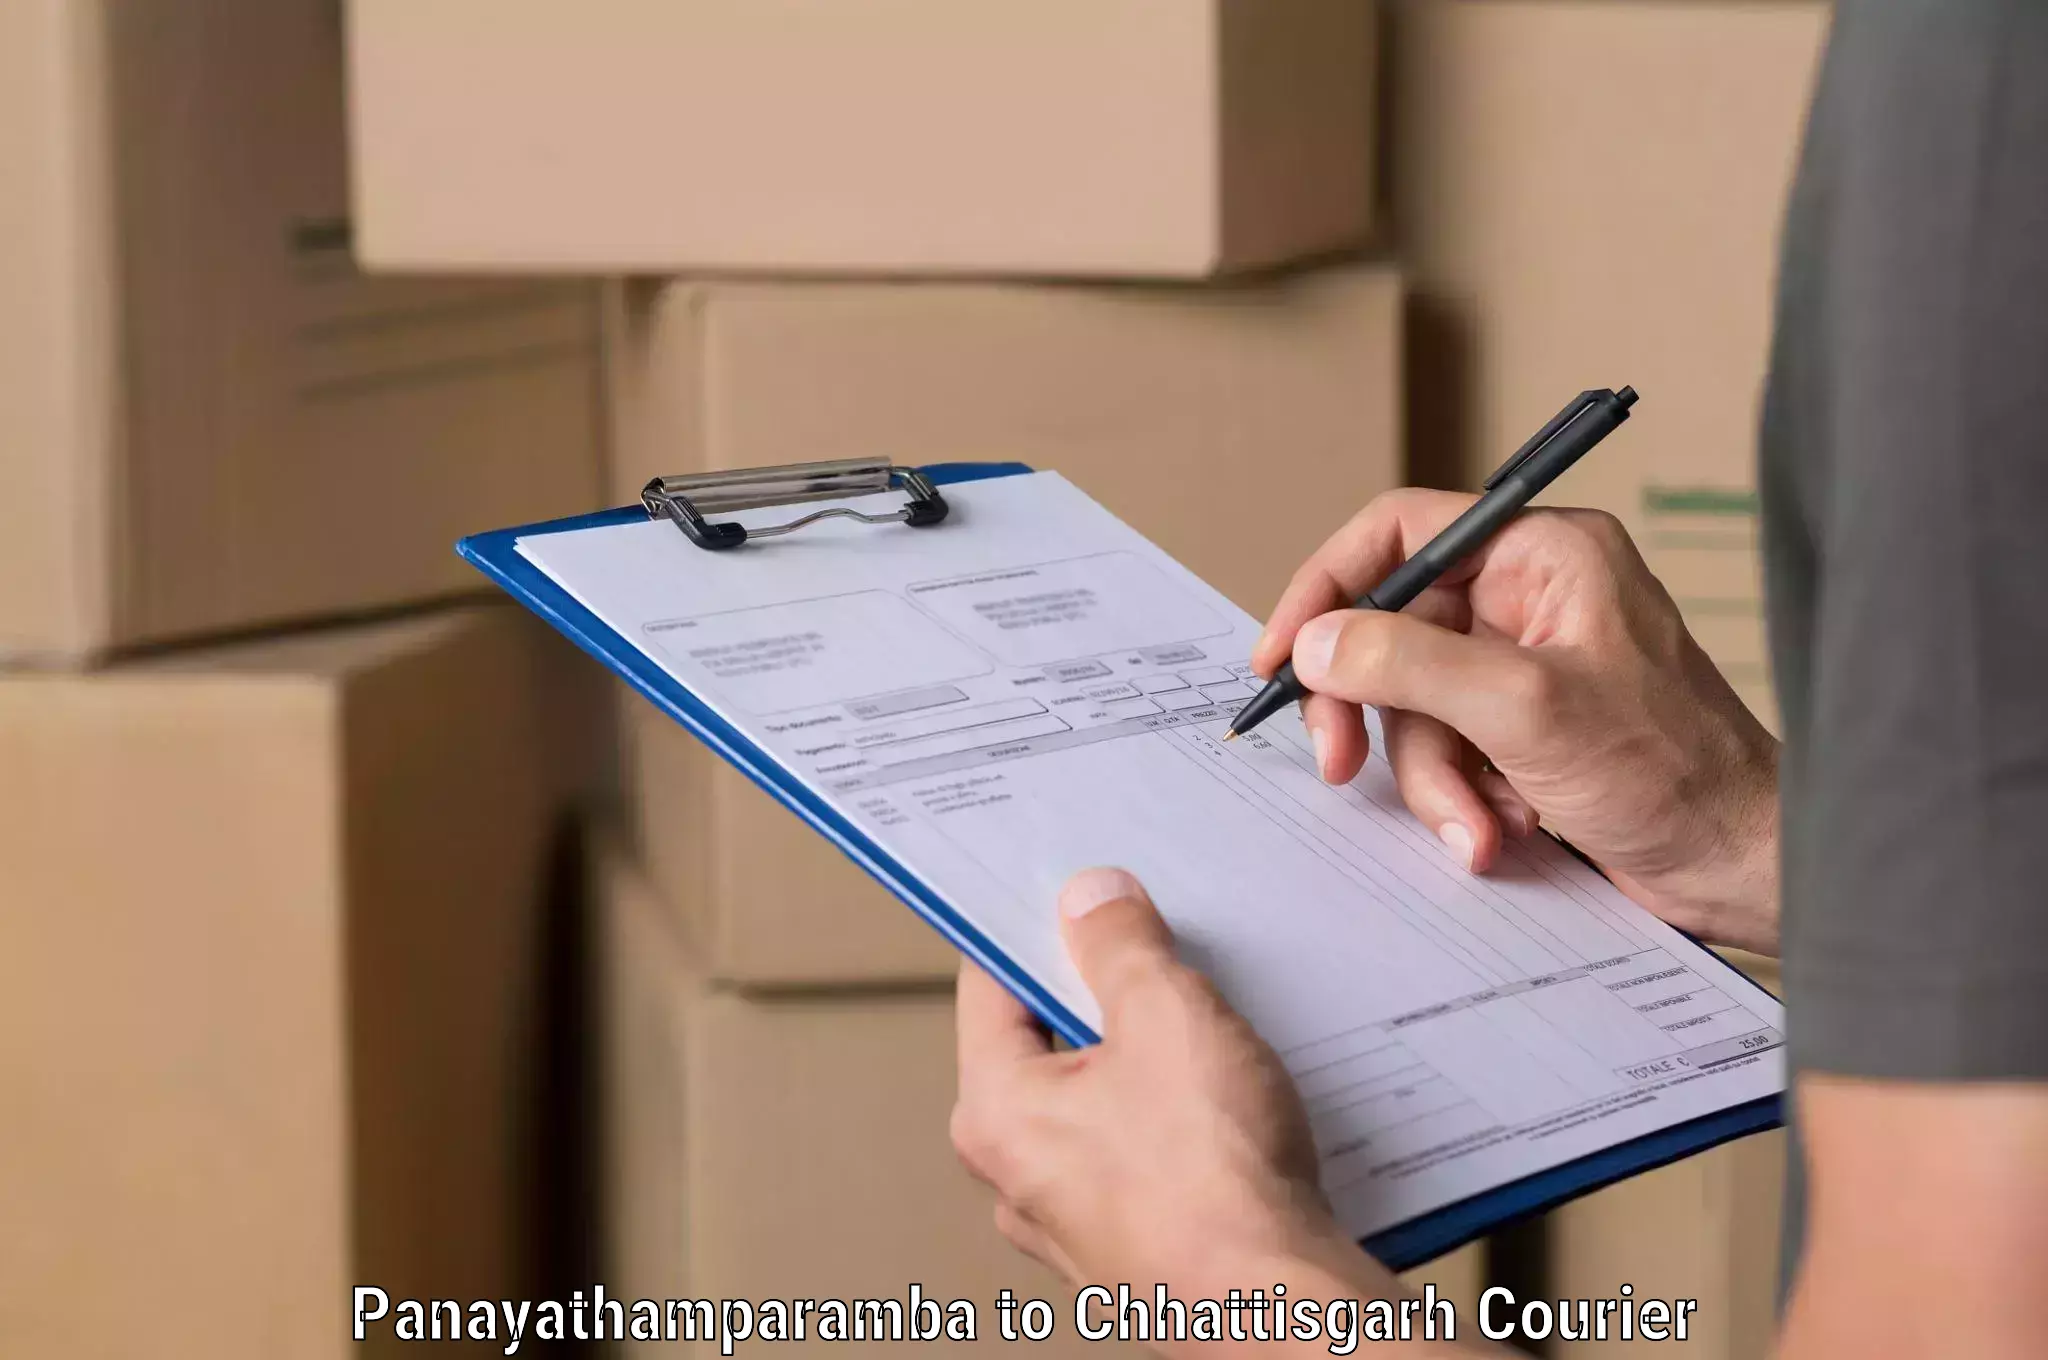 Quality courier services in Panayathamparamba to Chhattisgarh